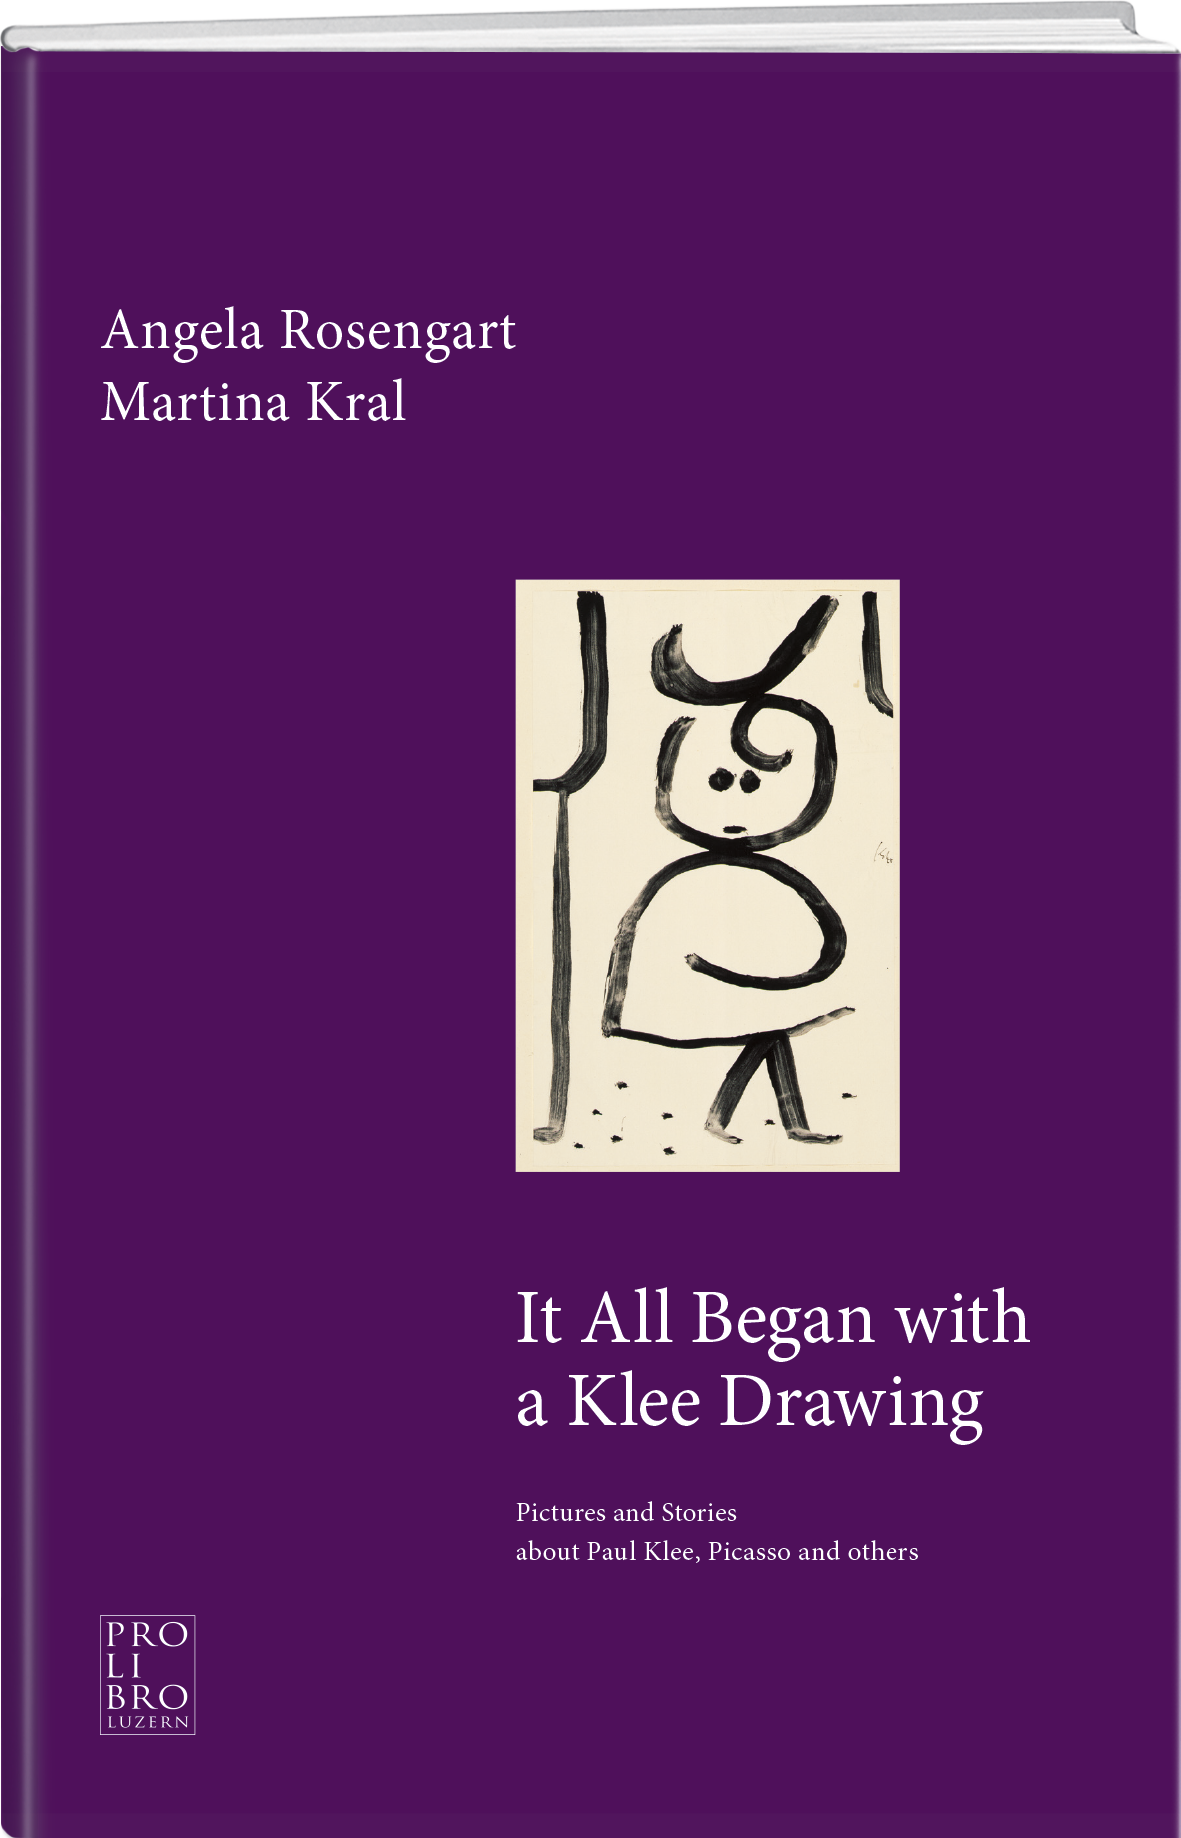 Div:  It all began with a Klee drawing - prolibro.ch